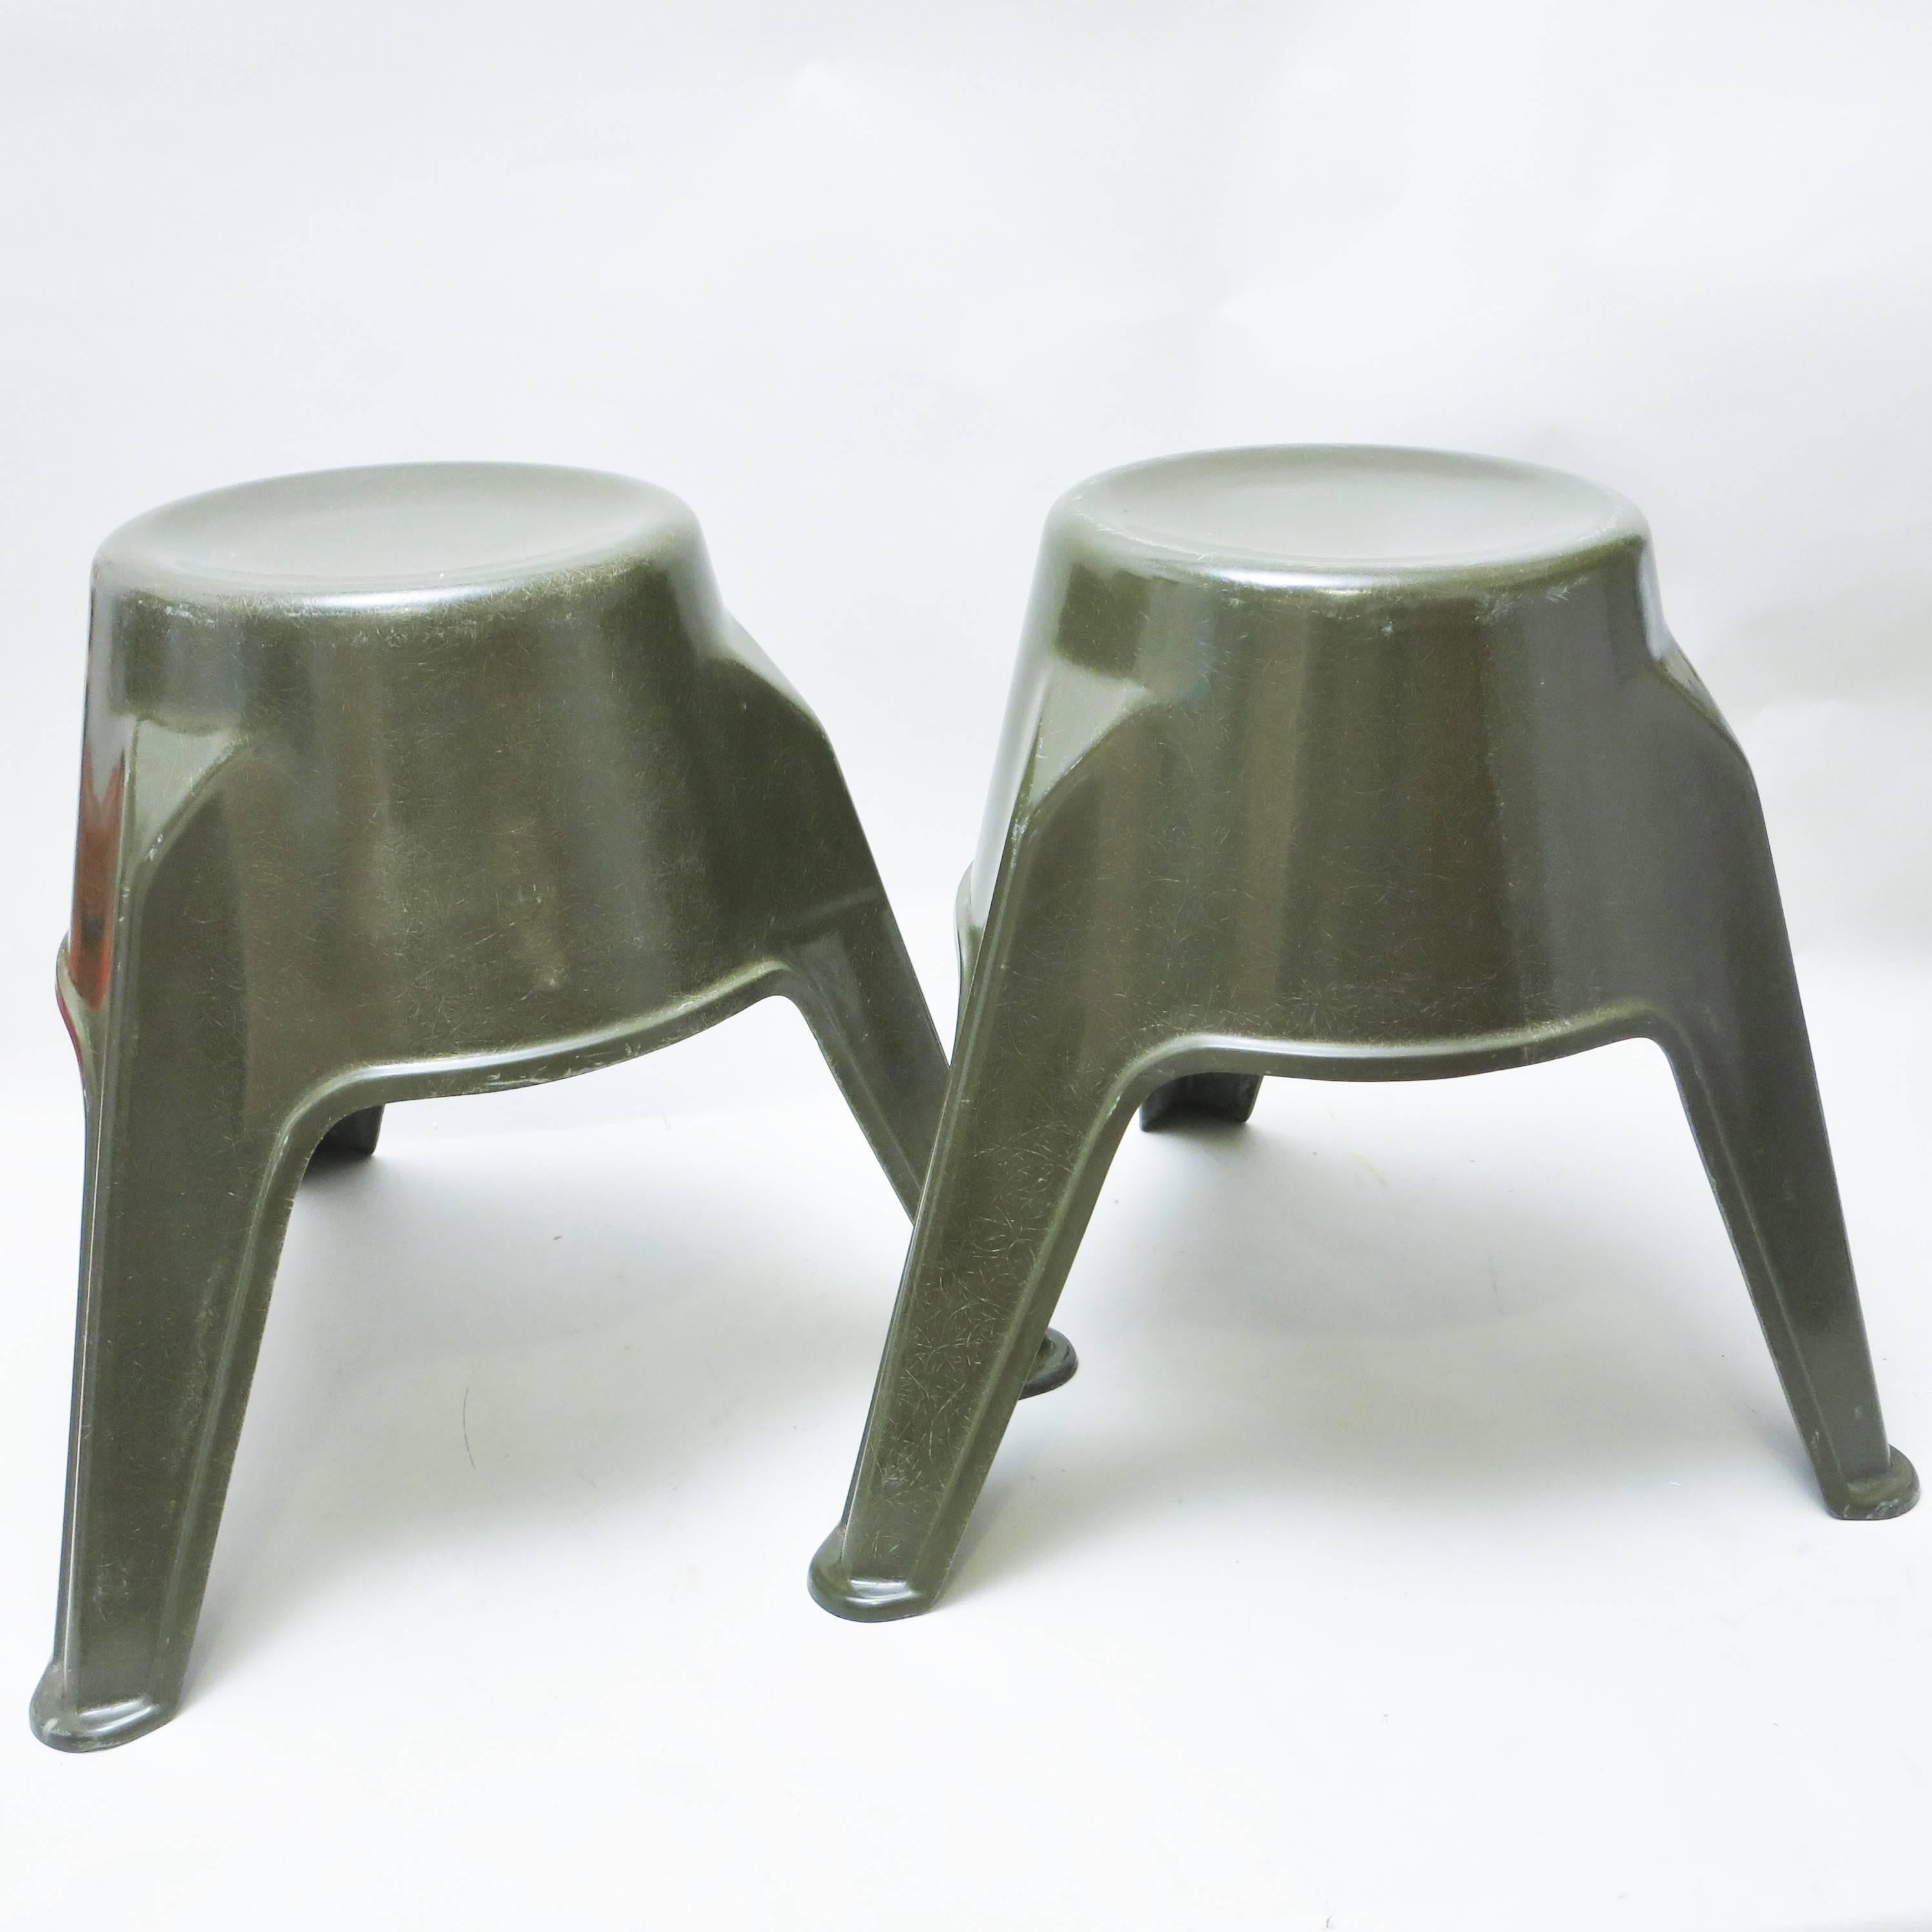 Rare pair of Mid-Century Modern stackable stools in olive green fiberglass. German work of the 1960s.
It also works perfectly as bedside tables.